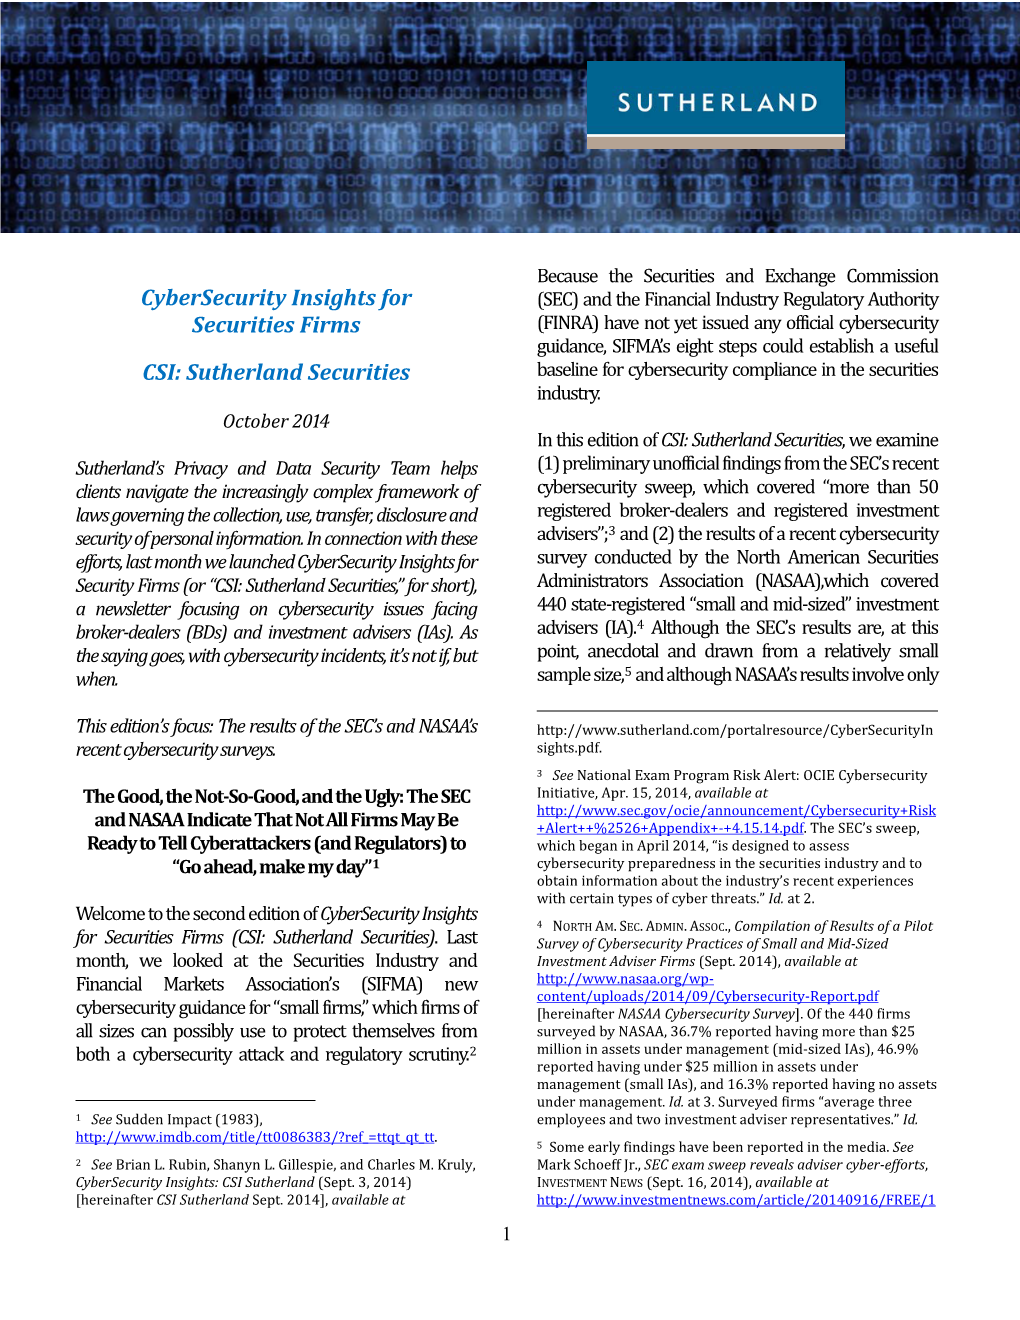 Cybersecurity Insights for Securities Firms